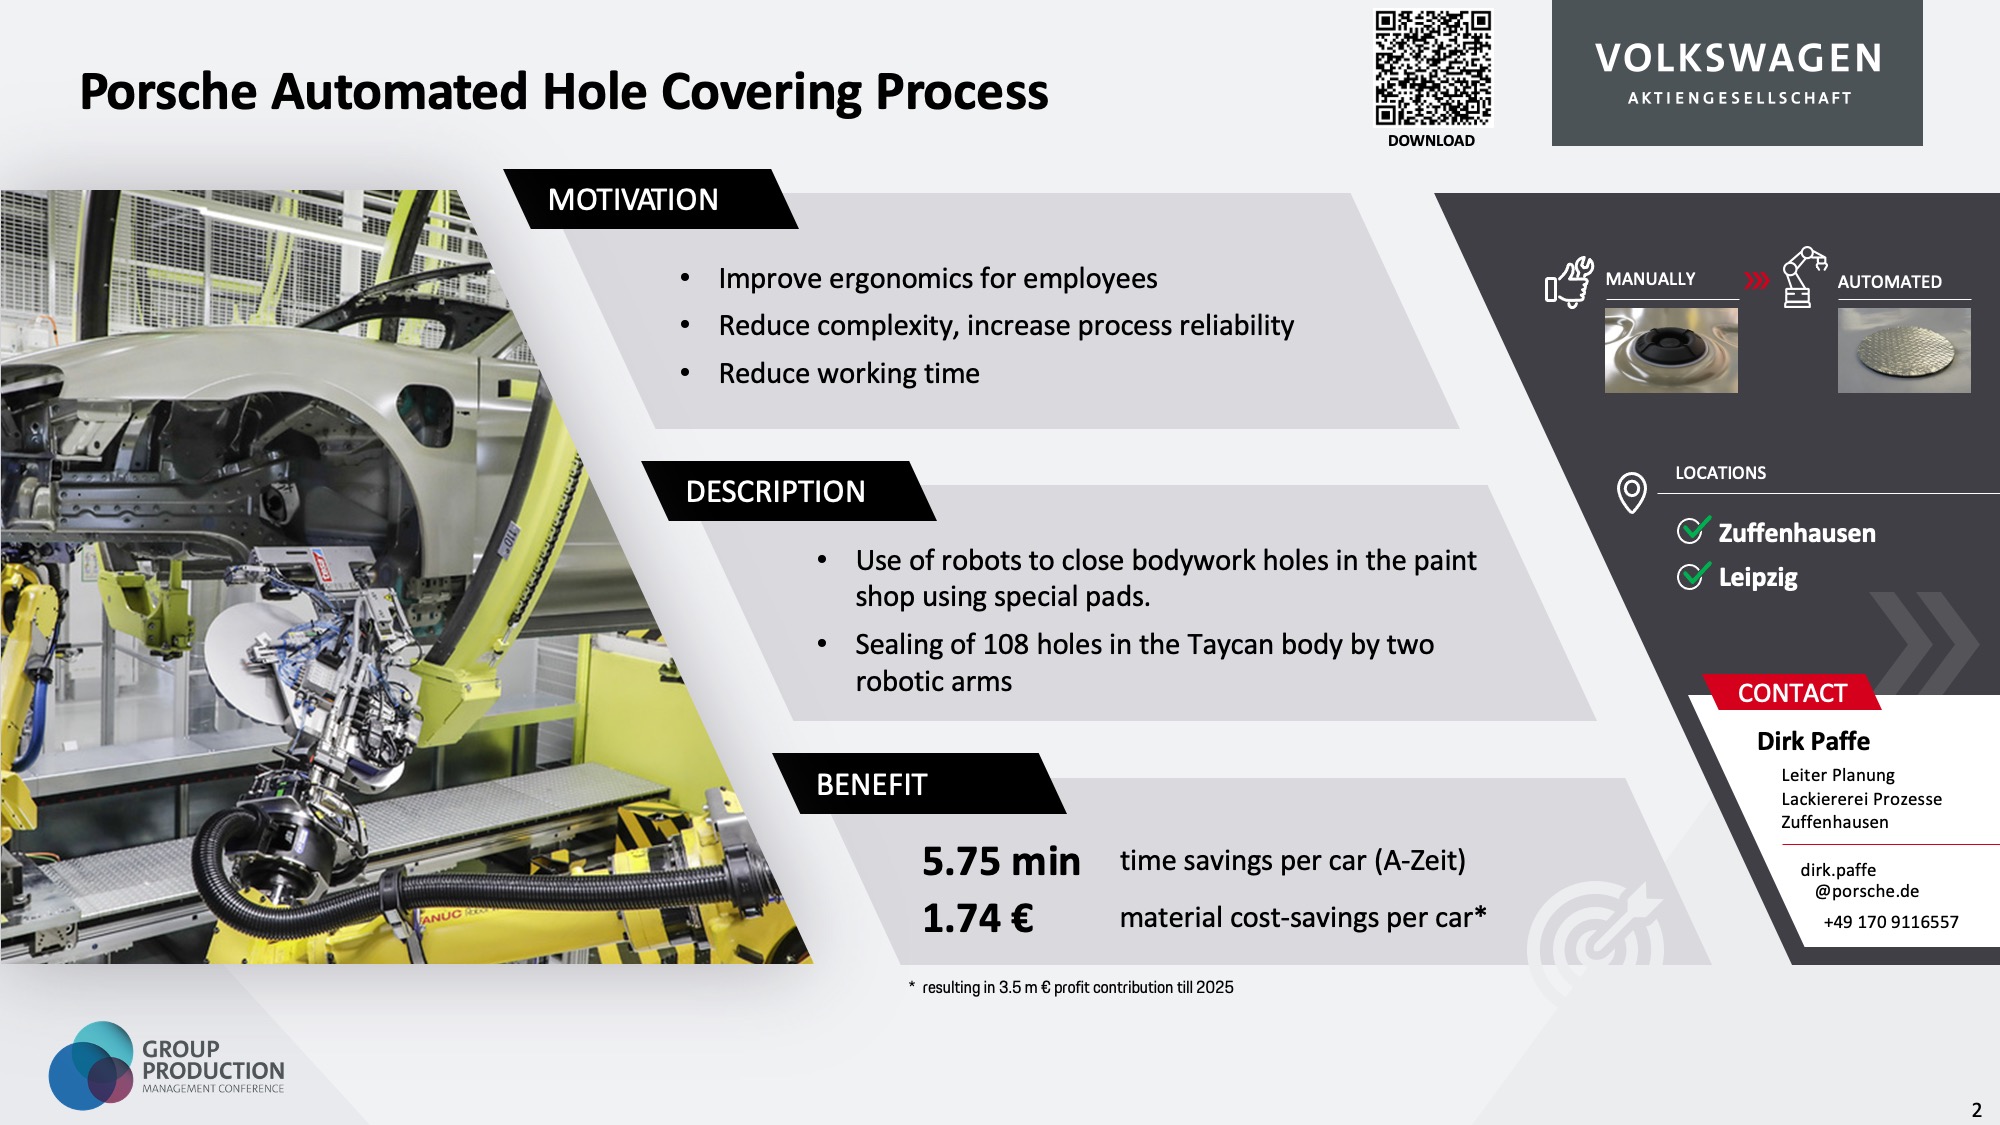 Porsche Automated Hole Covering Process